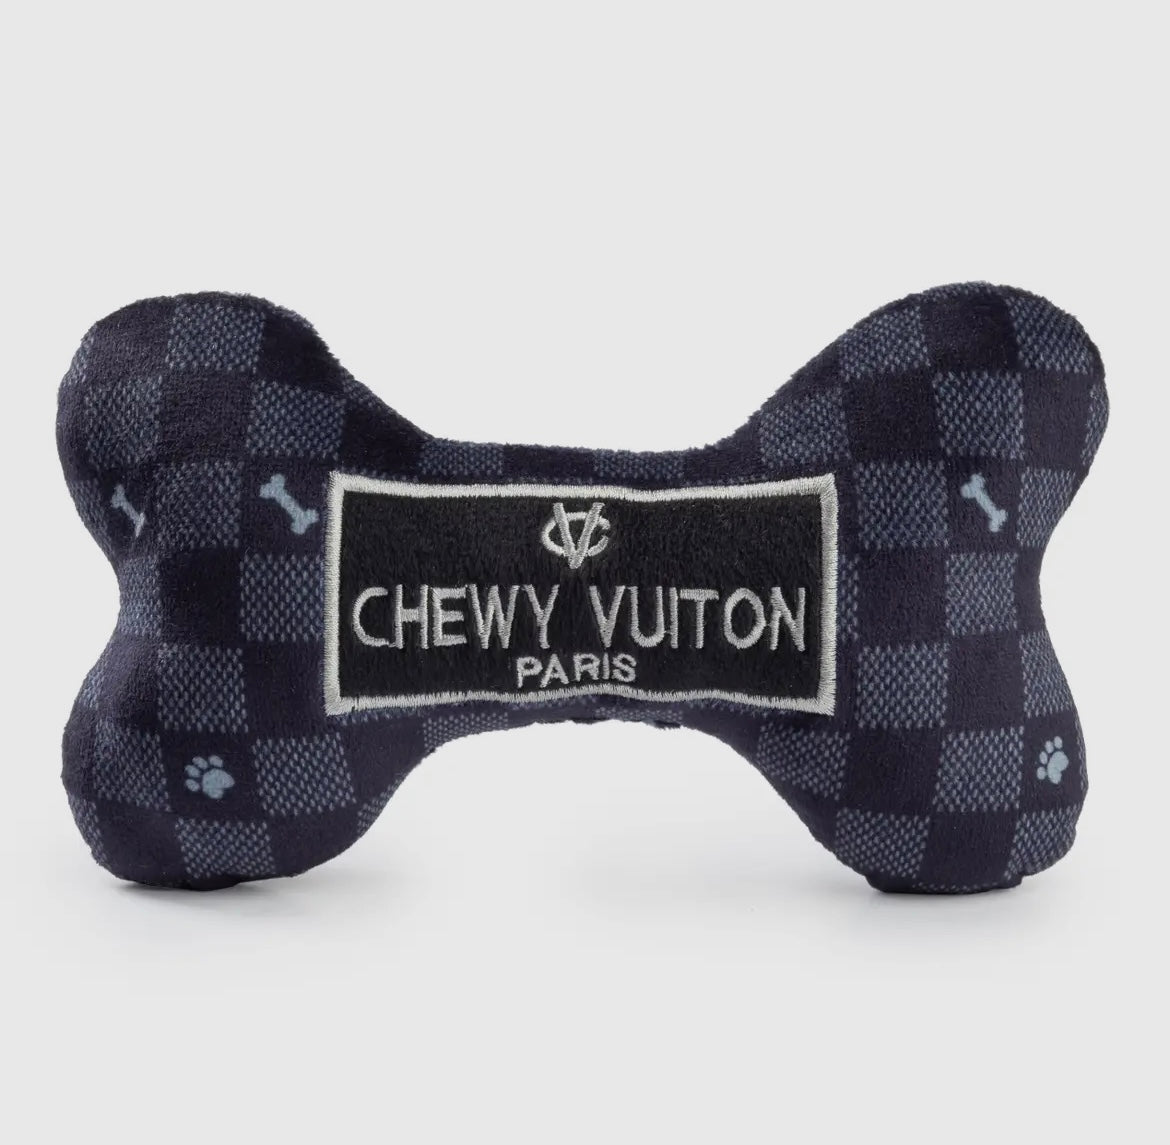 Black Checkered Chewy Vuiton Squeaker Toy